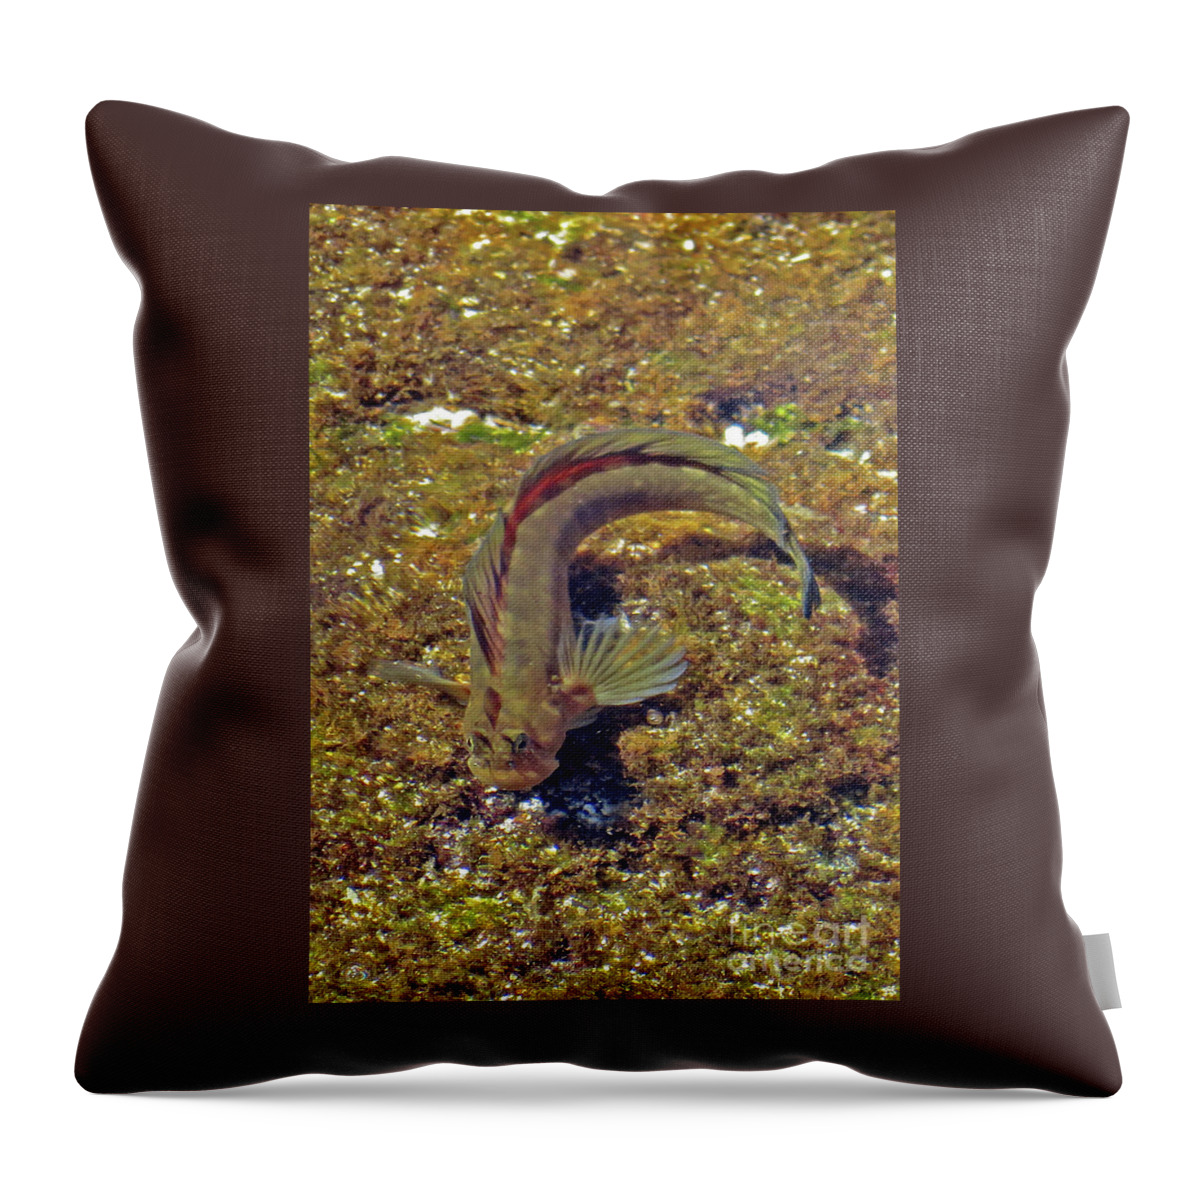 Gobies Throw Pillow featuring the photograph Goby by Cindy Murphy